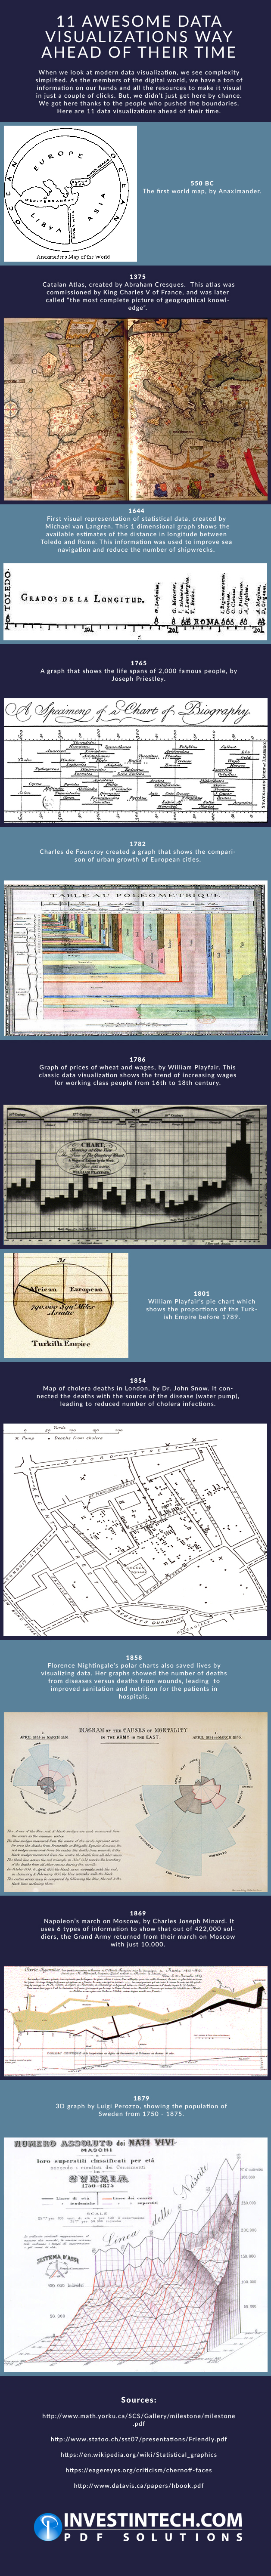 11 Awesome Data Visualizations Way Ahead of Their Time by InvestinTech.com